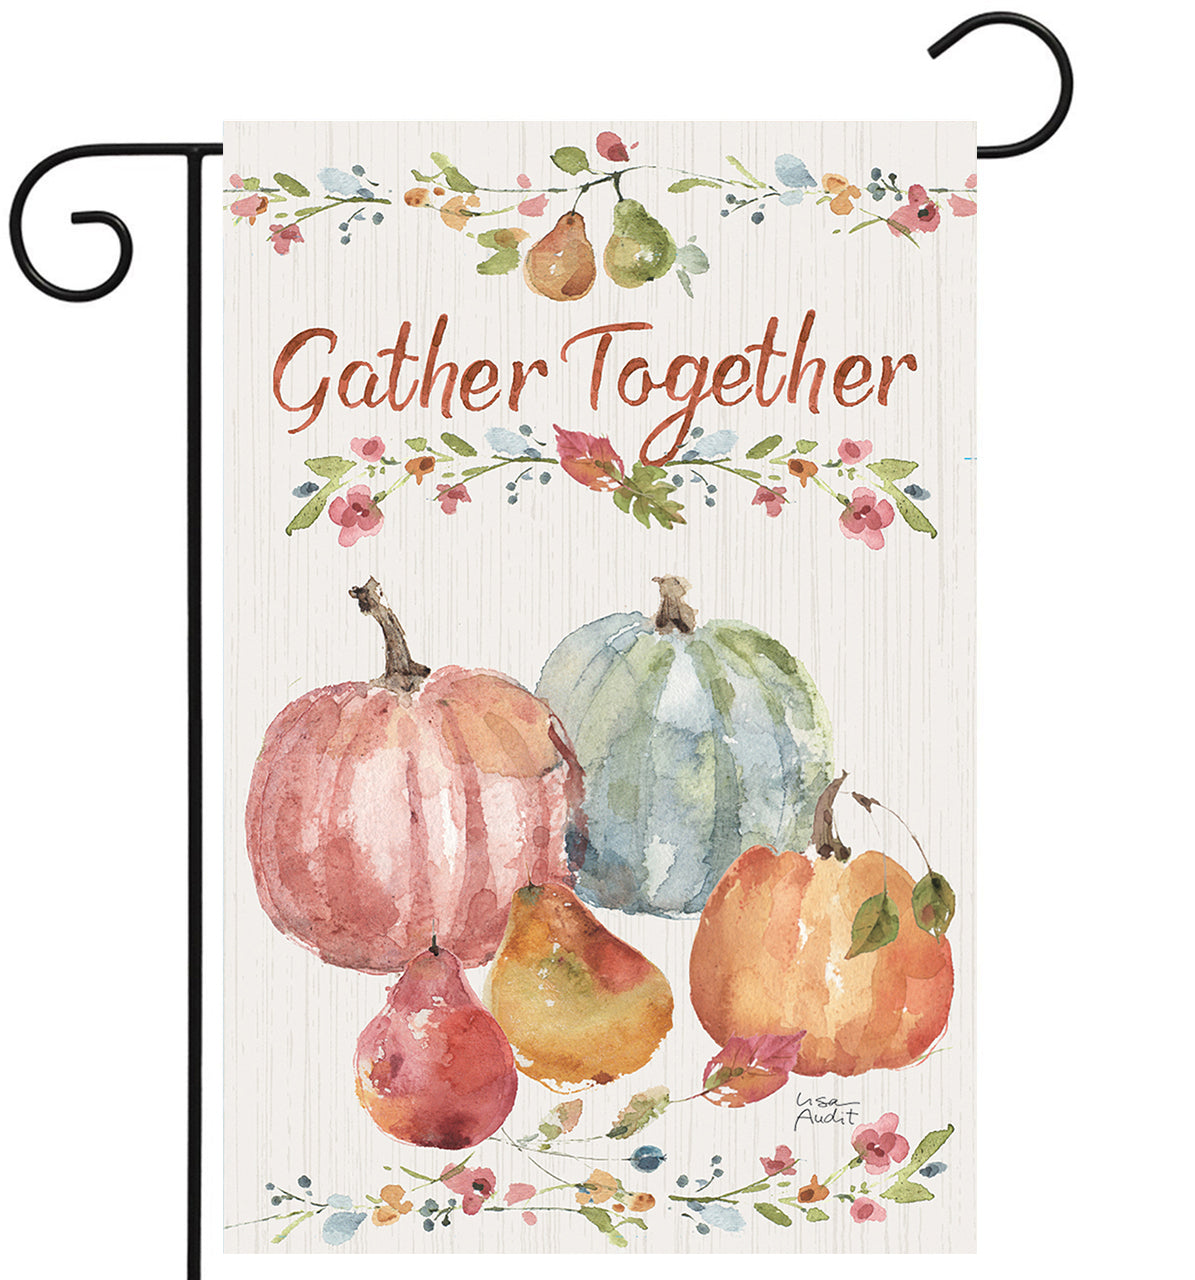 Gather Together - Small Garden Flag by Lang